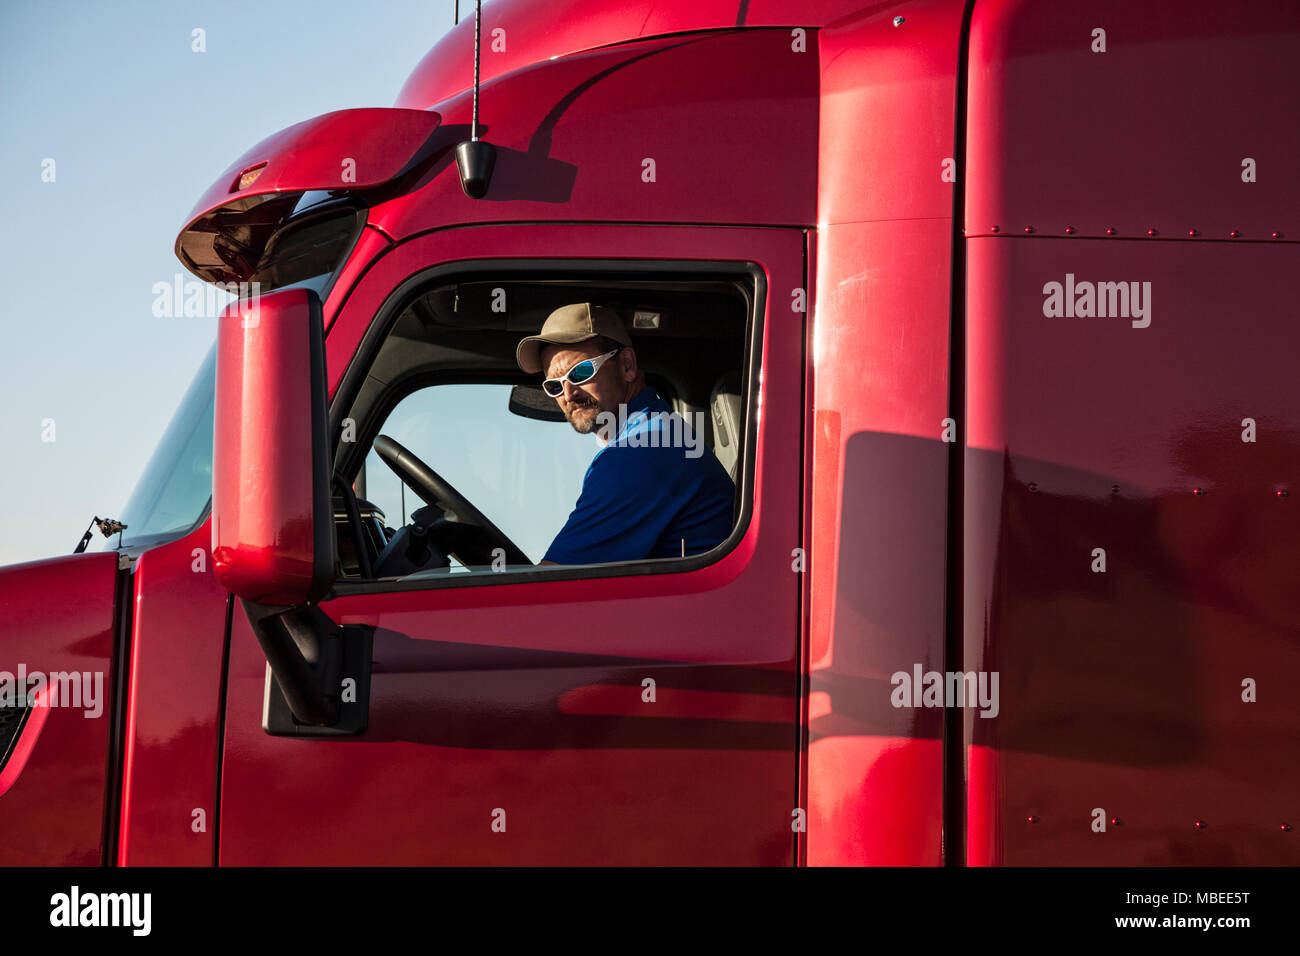 https://c8.alamy.com/comp/MBEE5T/trucker-truck-driver-sitting-in-his-cab-at-the-driving-wheel-looking-sideways-out-oif-the-window-MBEE5T.jpg